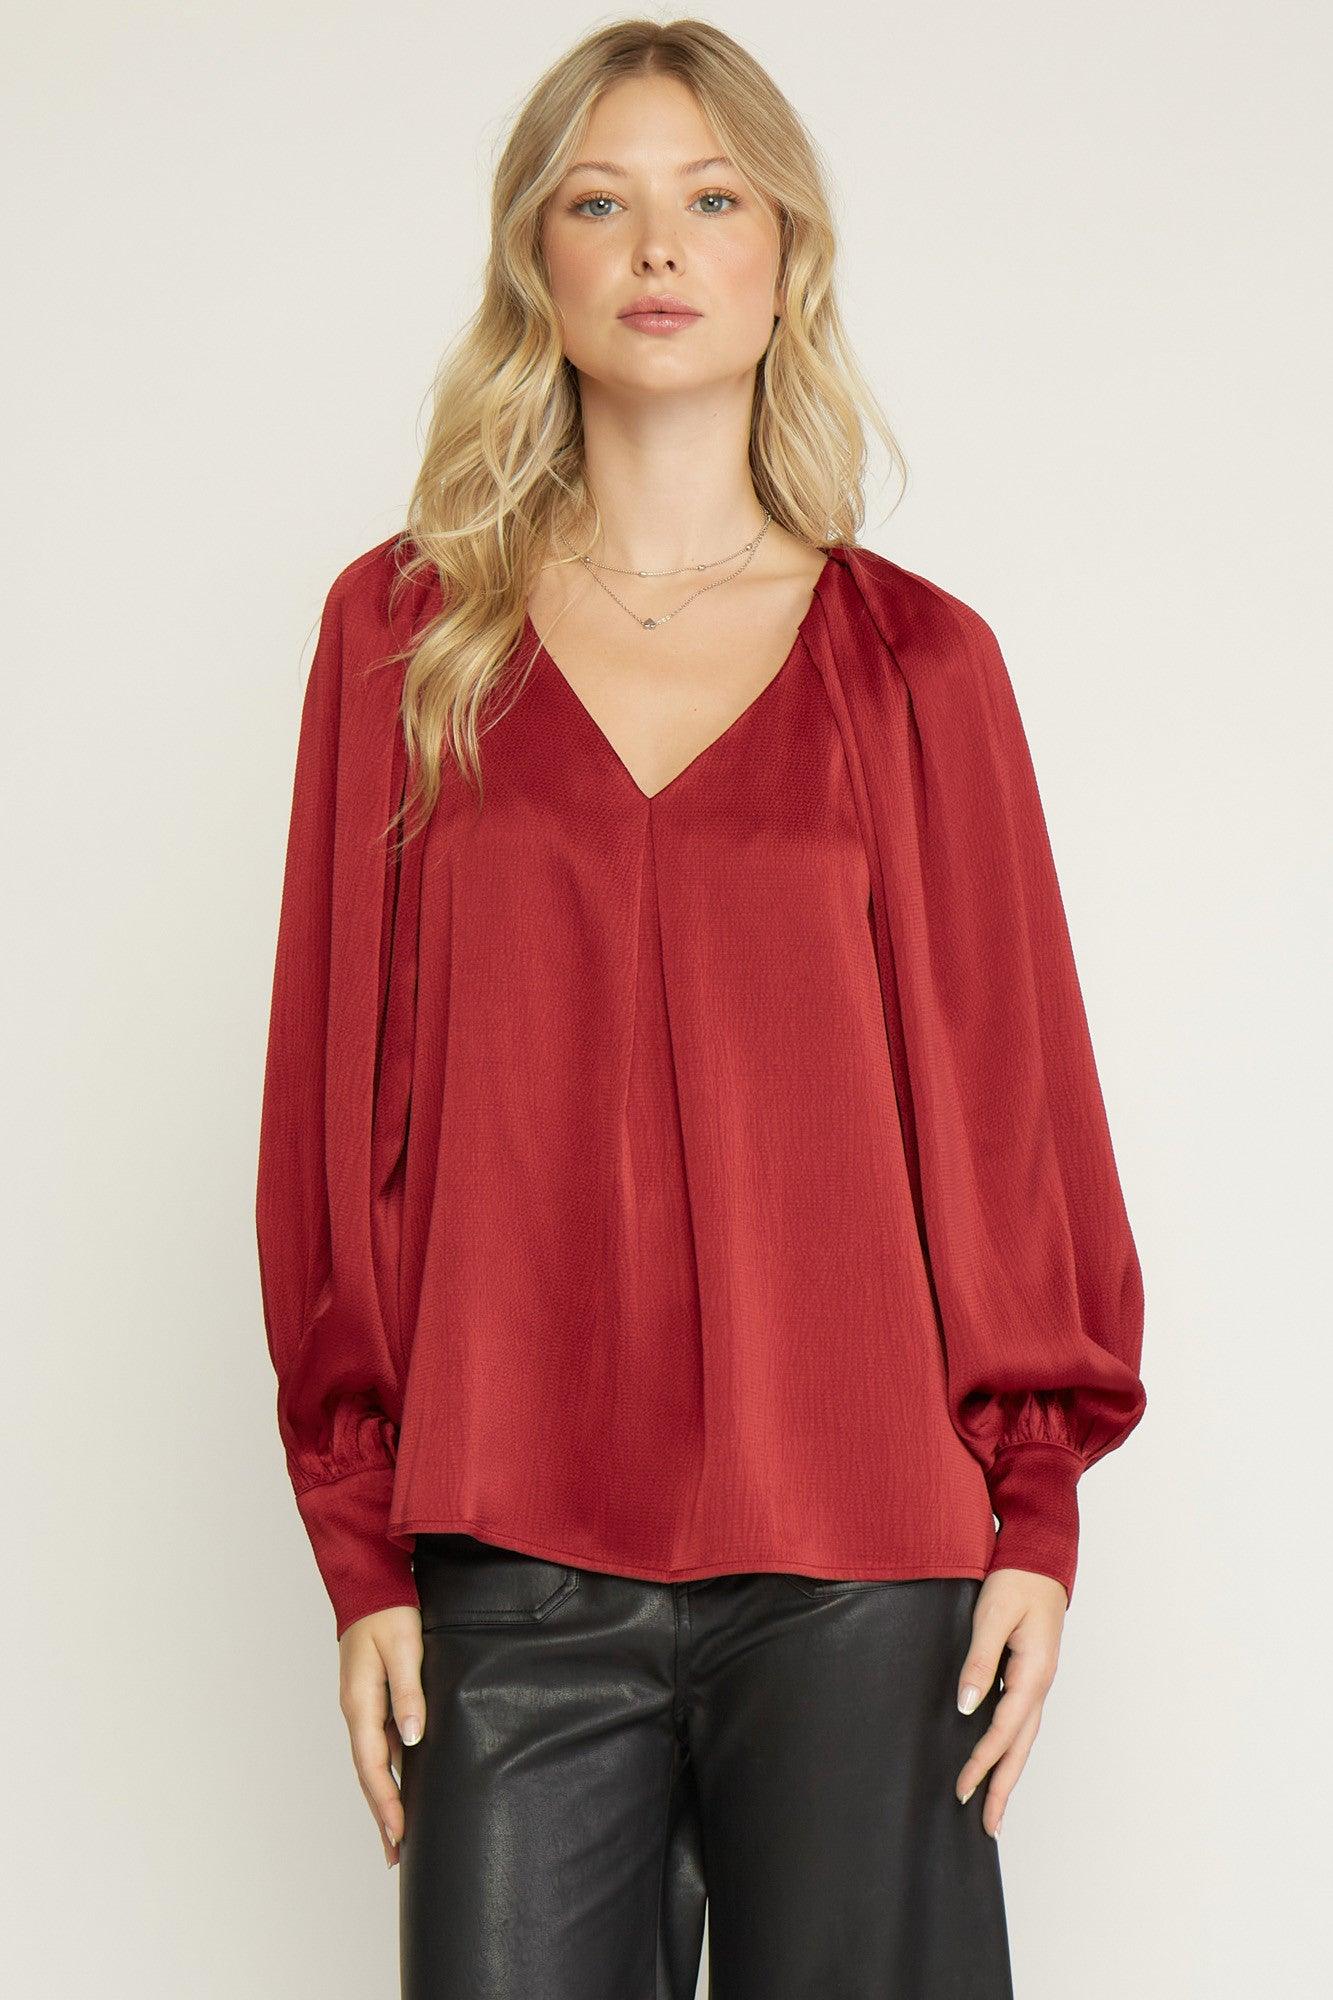 PLUS Satin v-neck long sleeve top - RK Collections Boutique